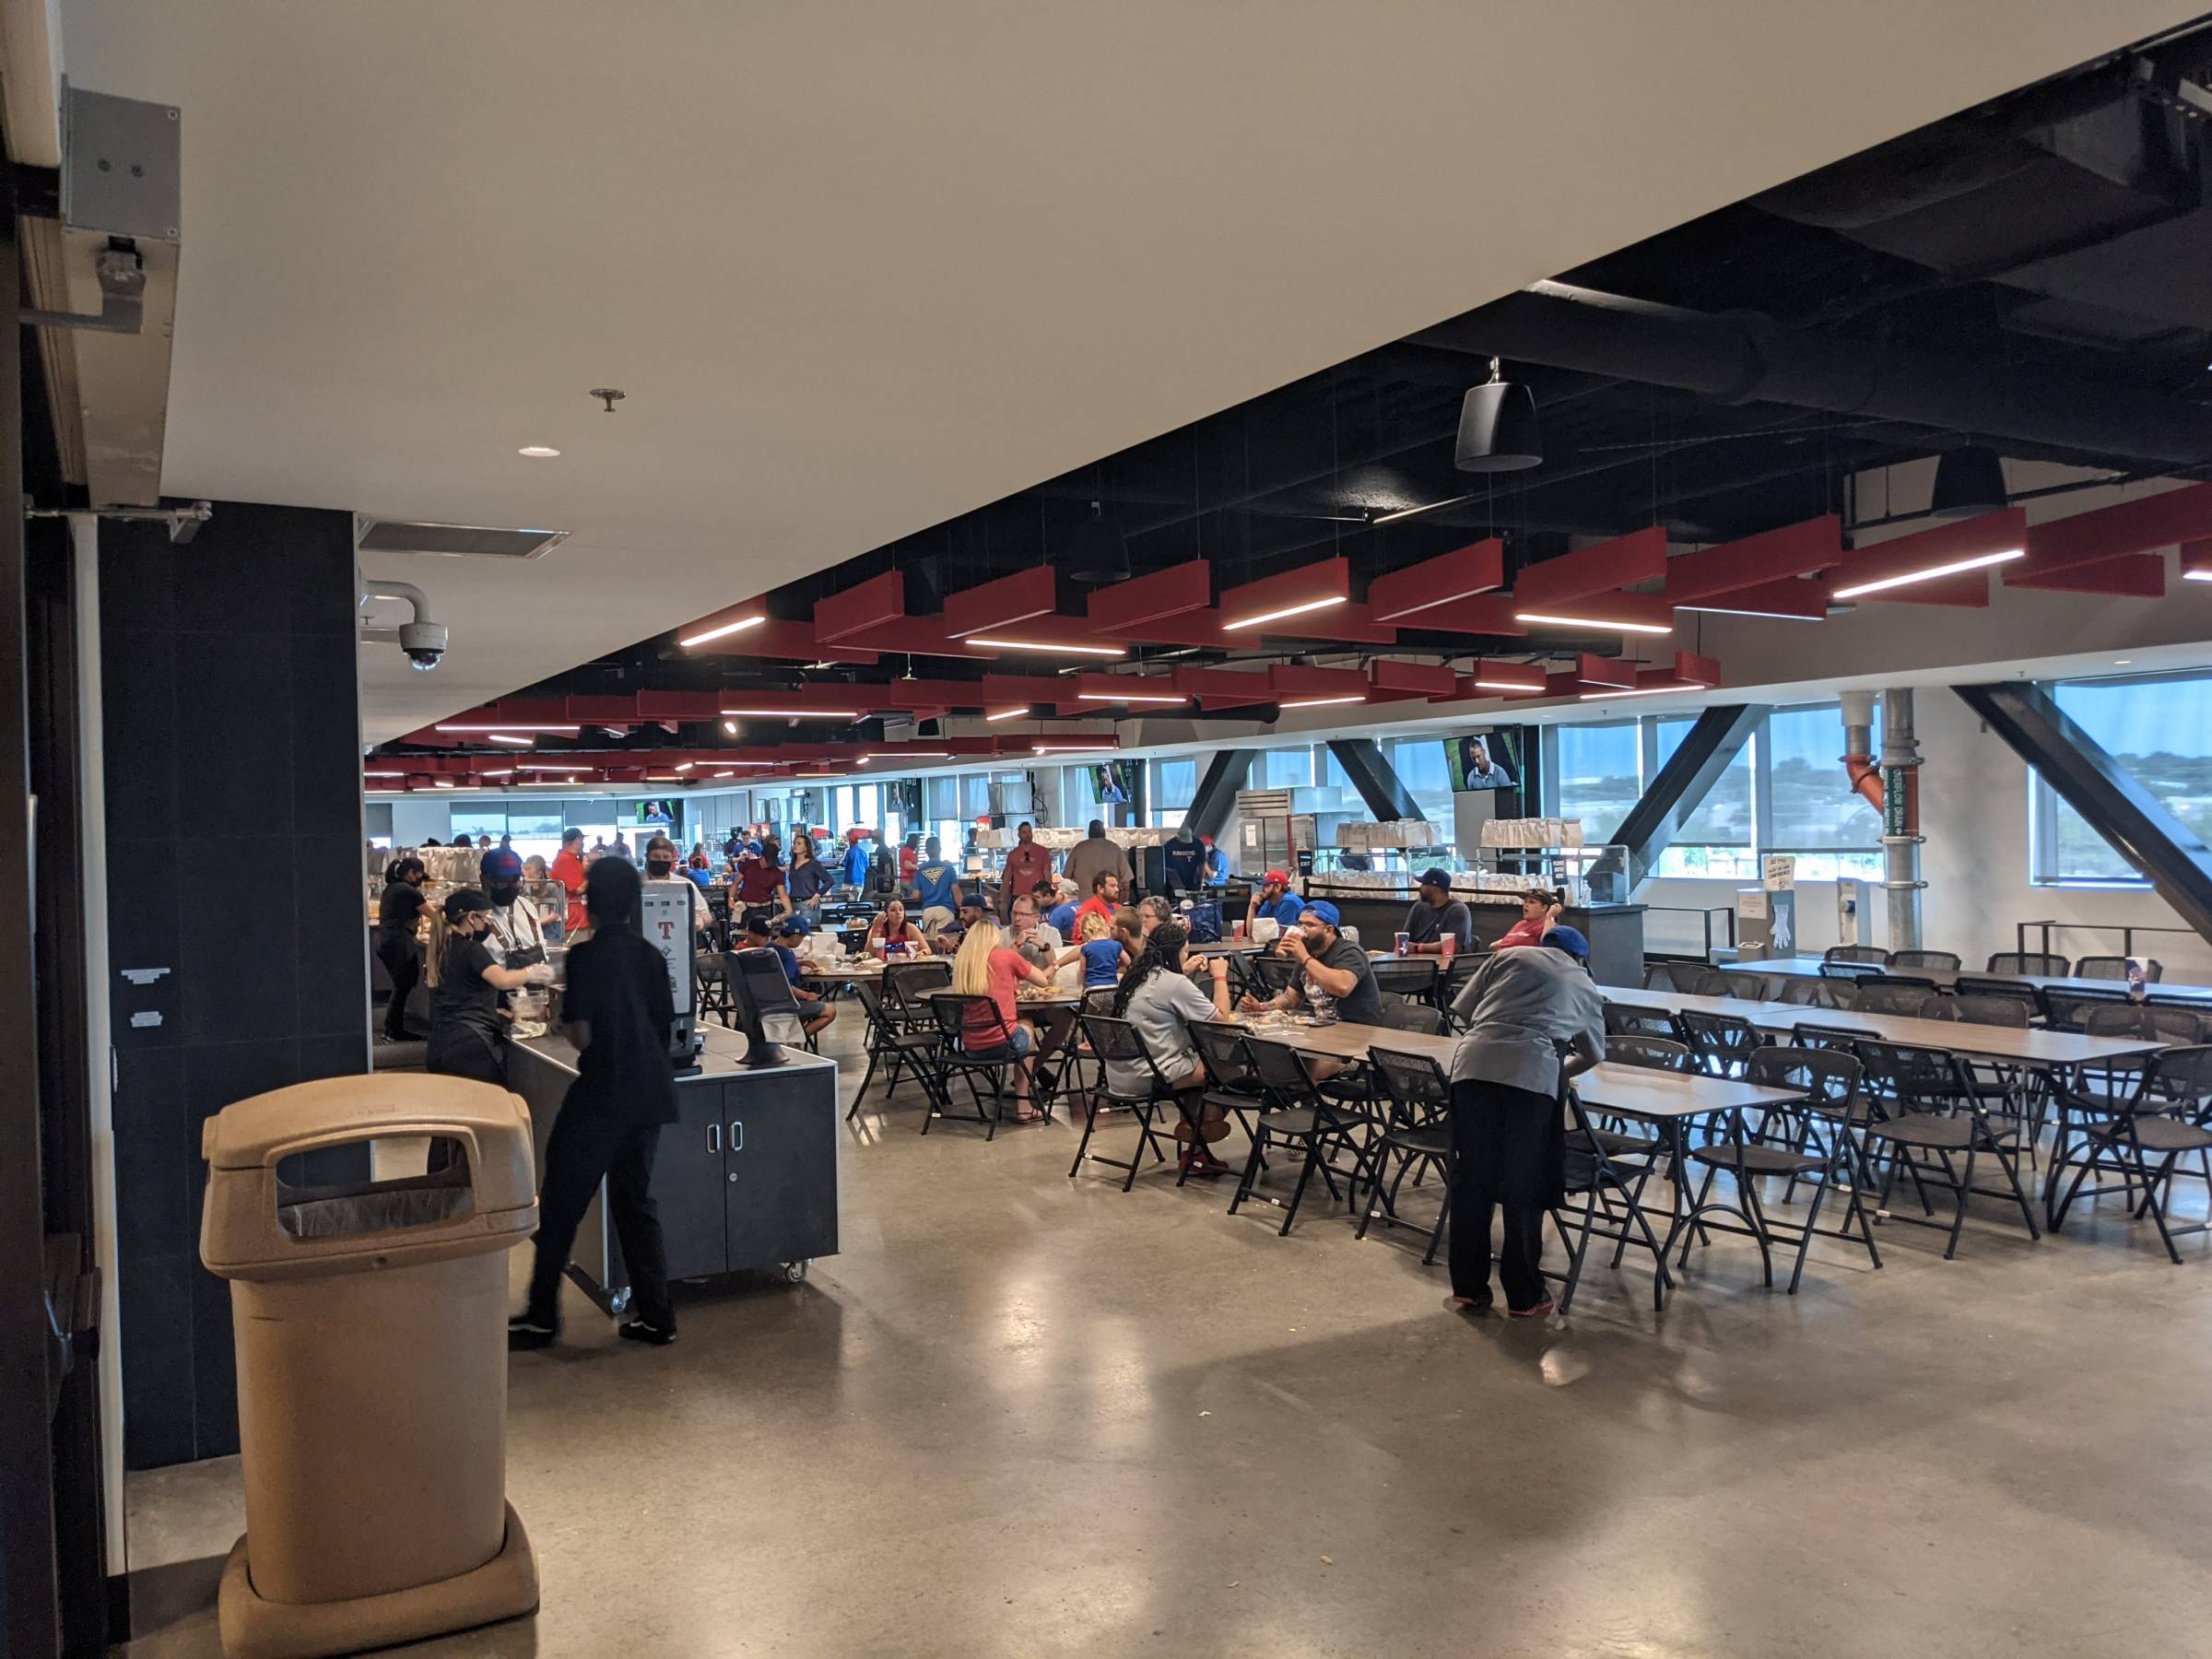 The Rangers and Globe Life Field introduce a few new concessions